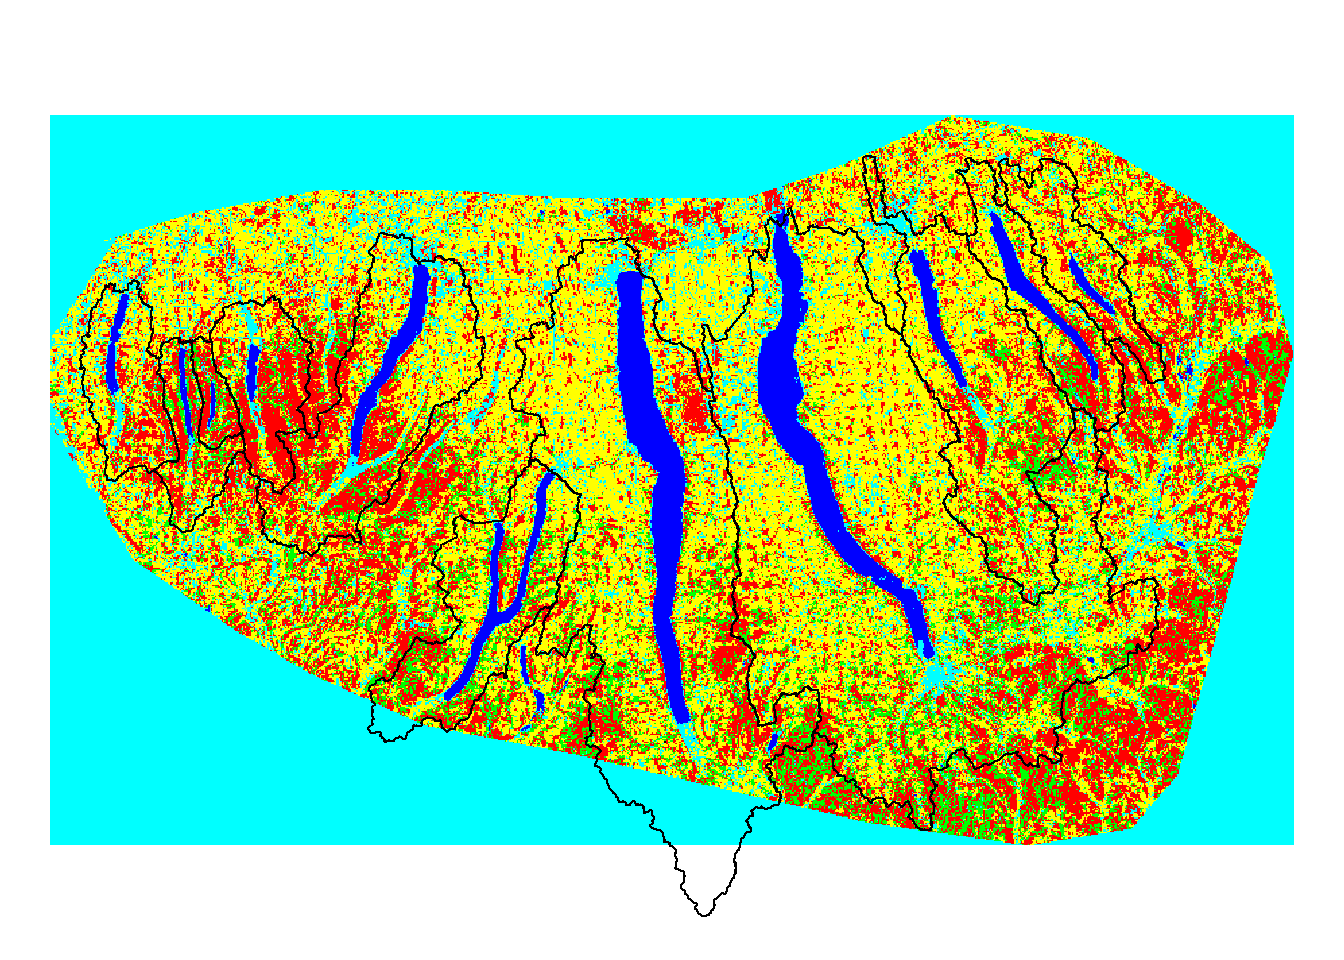 Overlaying Watershed Boundaries over Land Use Classification Map